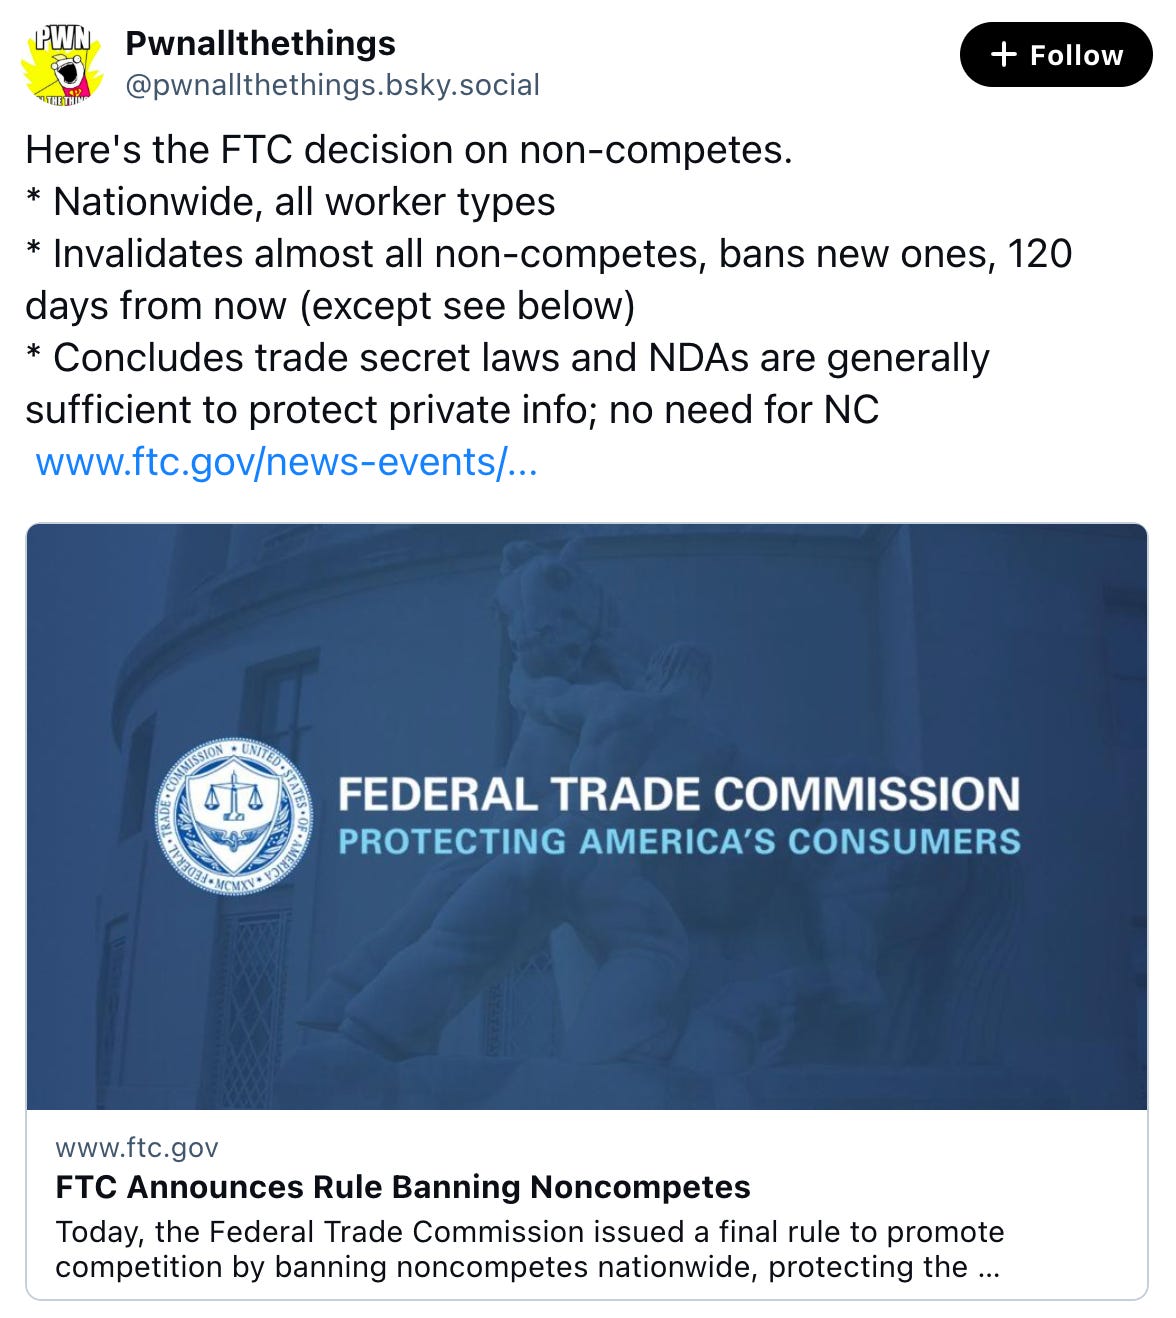 Pwnallthethings @pwnallthethings.bsky.social Here's the FTC decision on non-competes. * Nationwide, all worker types * Invalidates almost all non-competes, bans new ones, 120 days from now (except see below) * Concludes trade secret laws and NDAs are generally sufficient to protect private info; no need for NC  www.ftc.gov/news-events/...  www.ftc.gov FTC Announces Rule Banning Noncompetes Today, the Federal Trade Commission issued a final rule to promote competition by banning noncompetes nationwide, protecting the fundamen Apr 23, 2024 at 12:32 PM 289 reposts